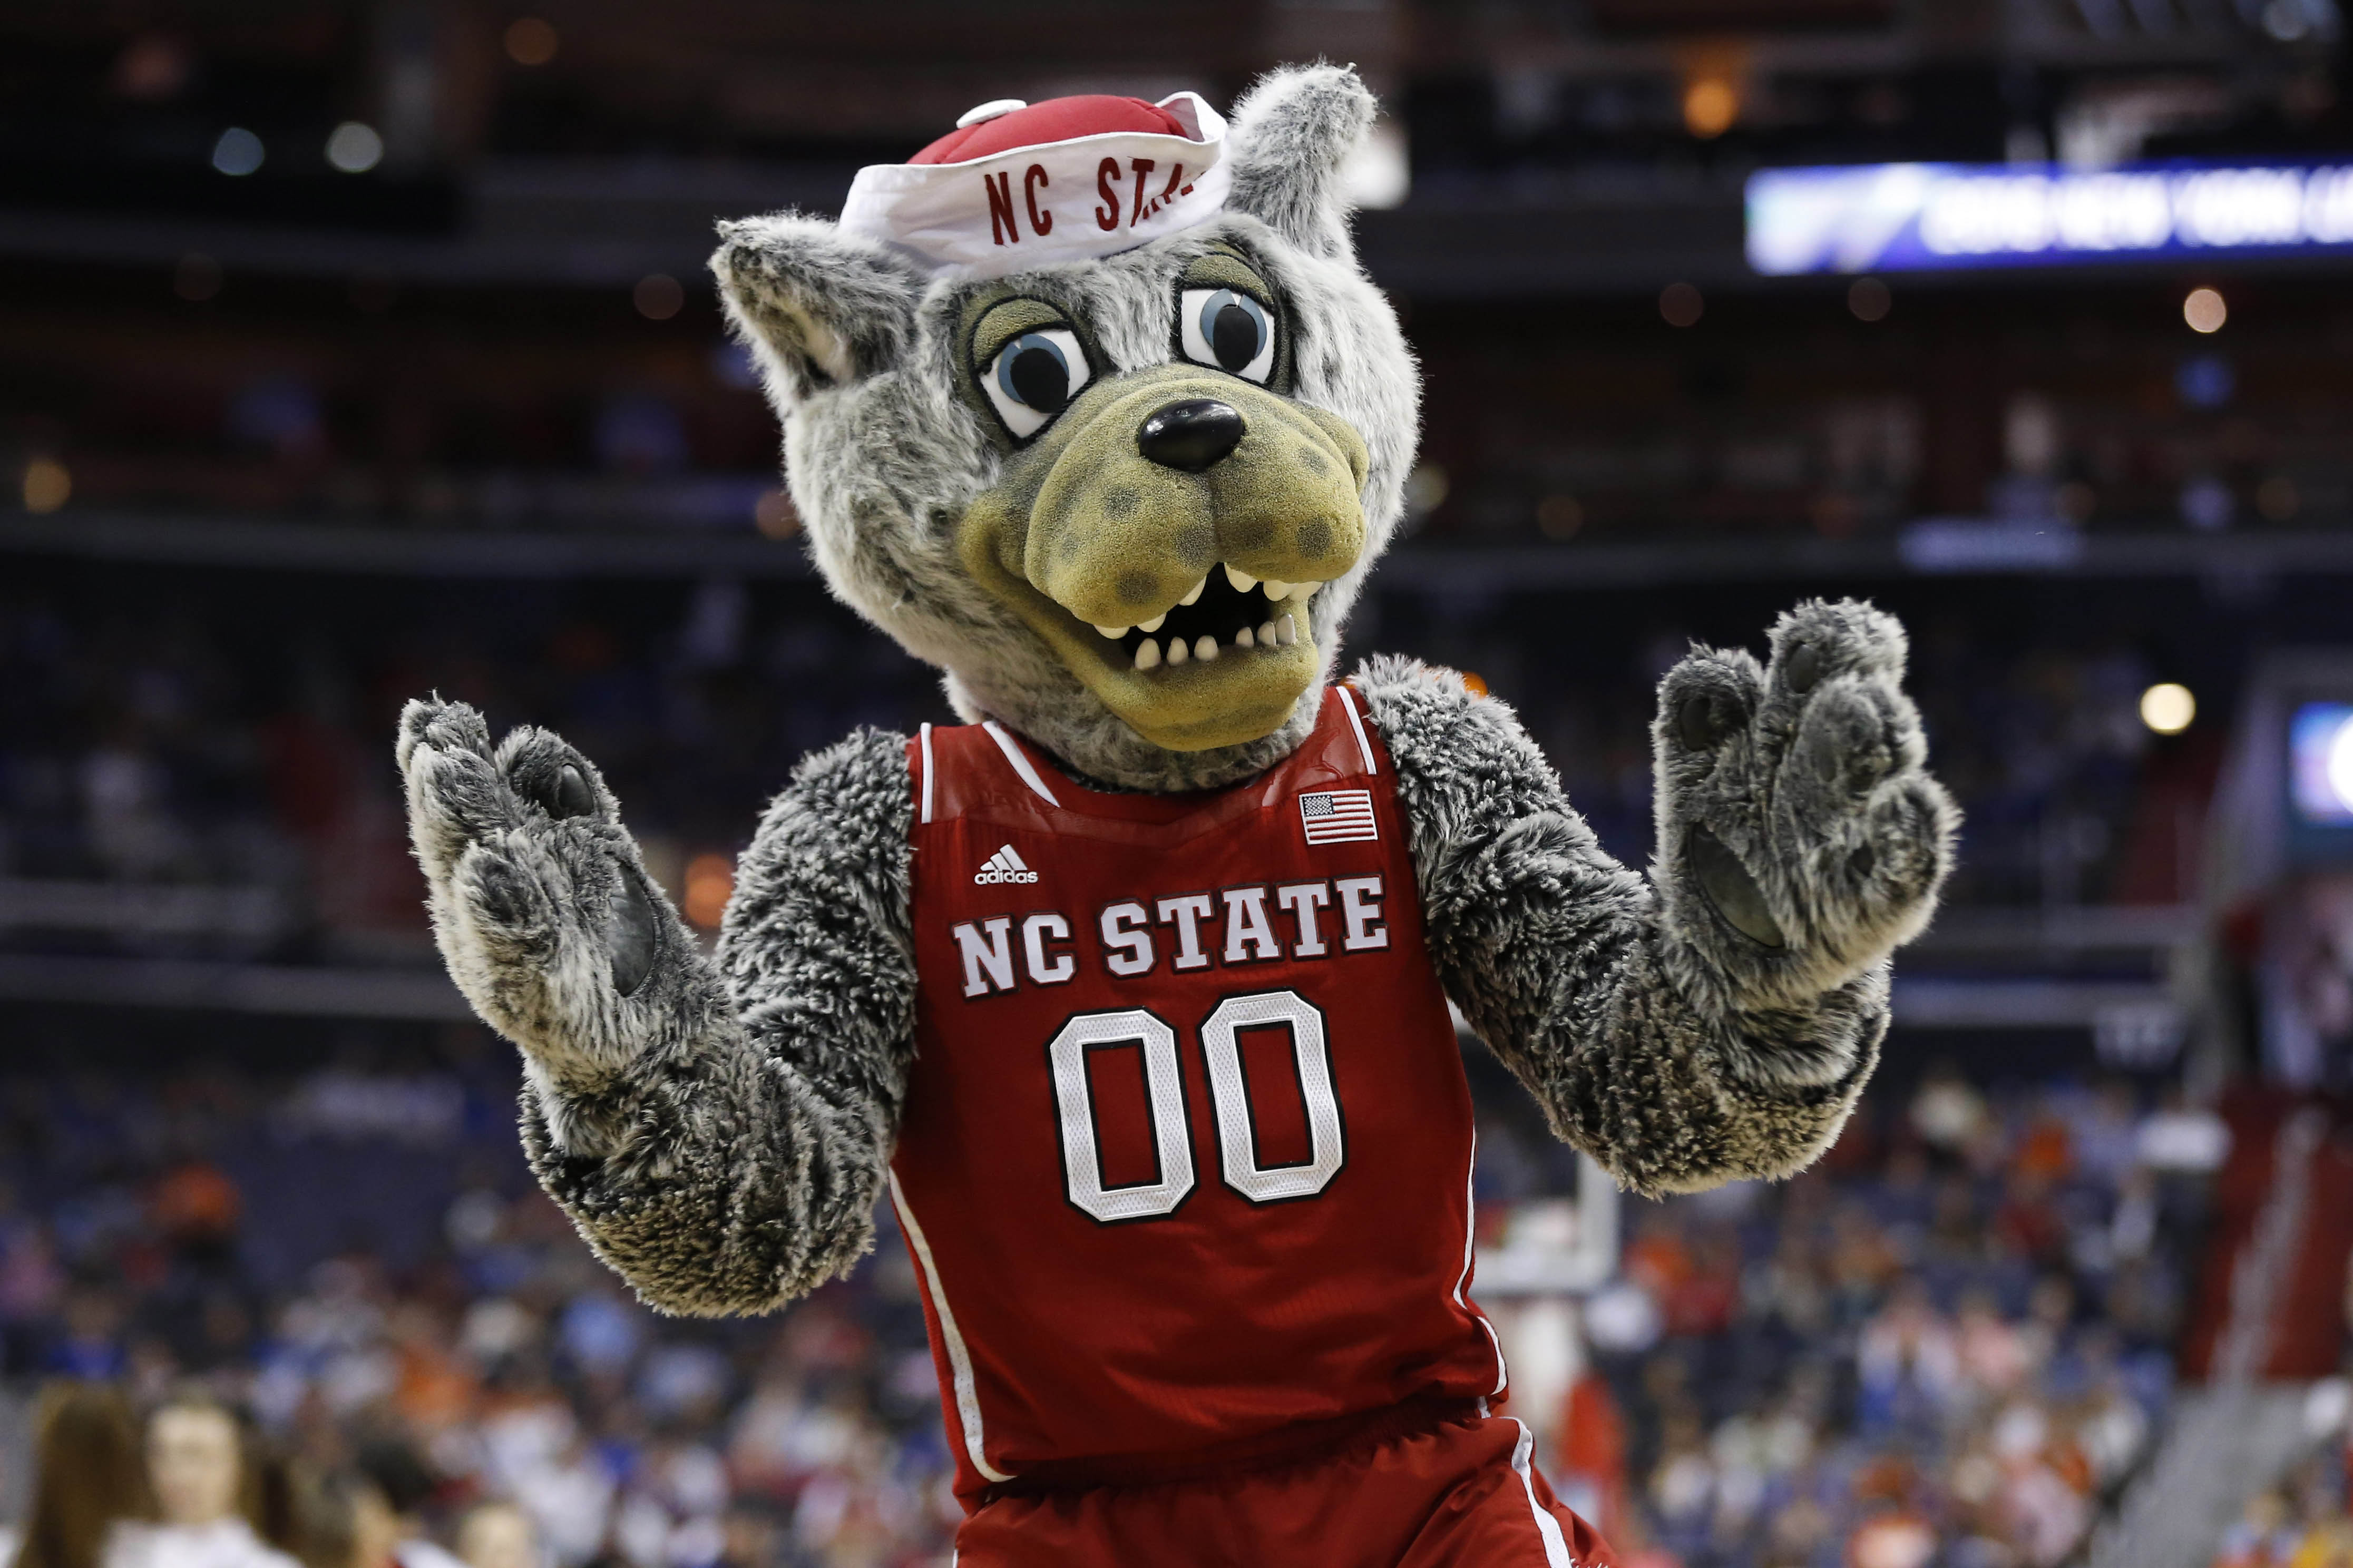 Mr. Wuf during NC State’s 92-89 loss to No. 19 Duke in the second round of the ACC tournament on March 9, 2016.